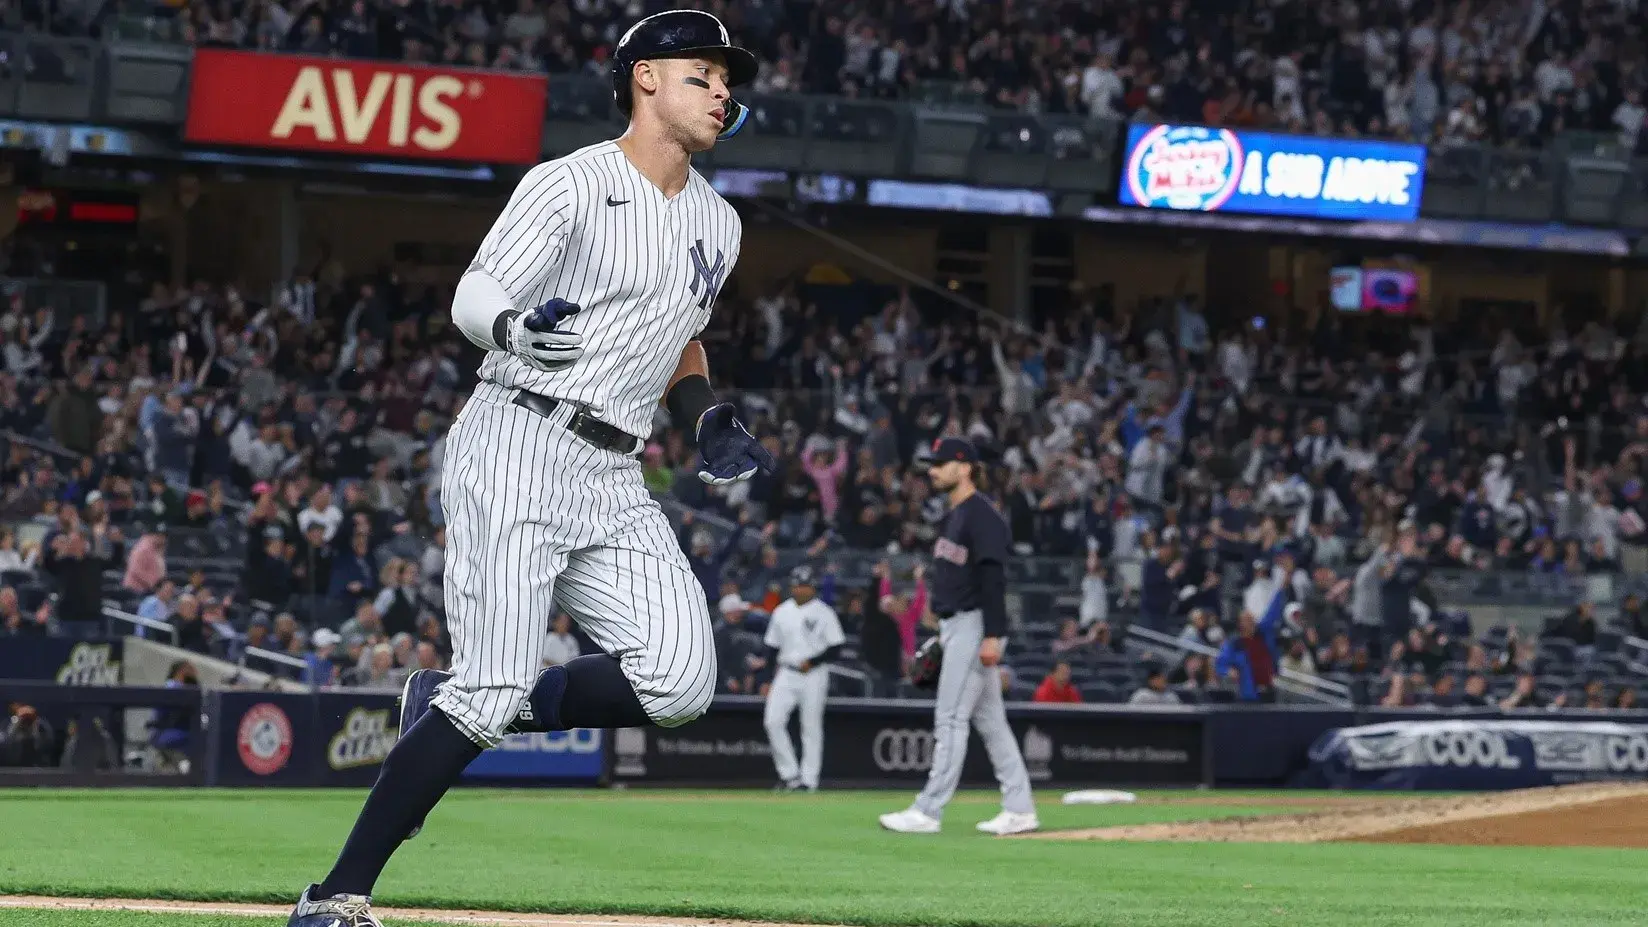 Apr 22, 2022; Bronx, New York, USA; New York Yankees right fielder Aaron Judge (99) rounds the bases after hitting a solo home run during the fifth inning off of Cleveland Guardians relief pitcher Tanner Tully (56) at Yankee Stadium. / Vincent Carchietta-USA TODAY Sports